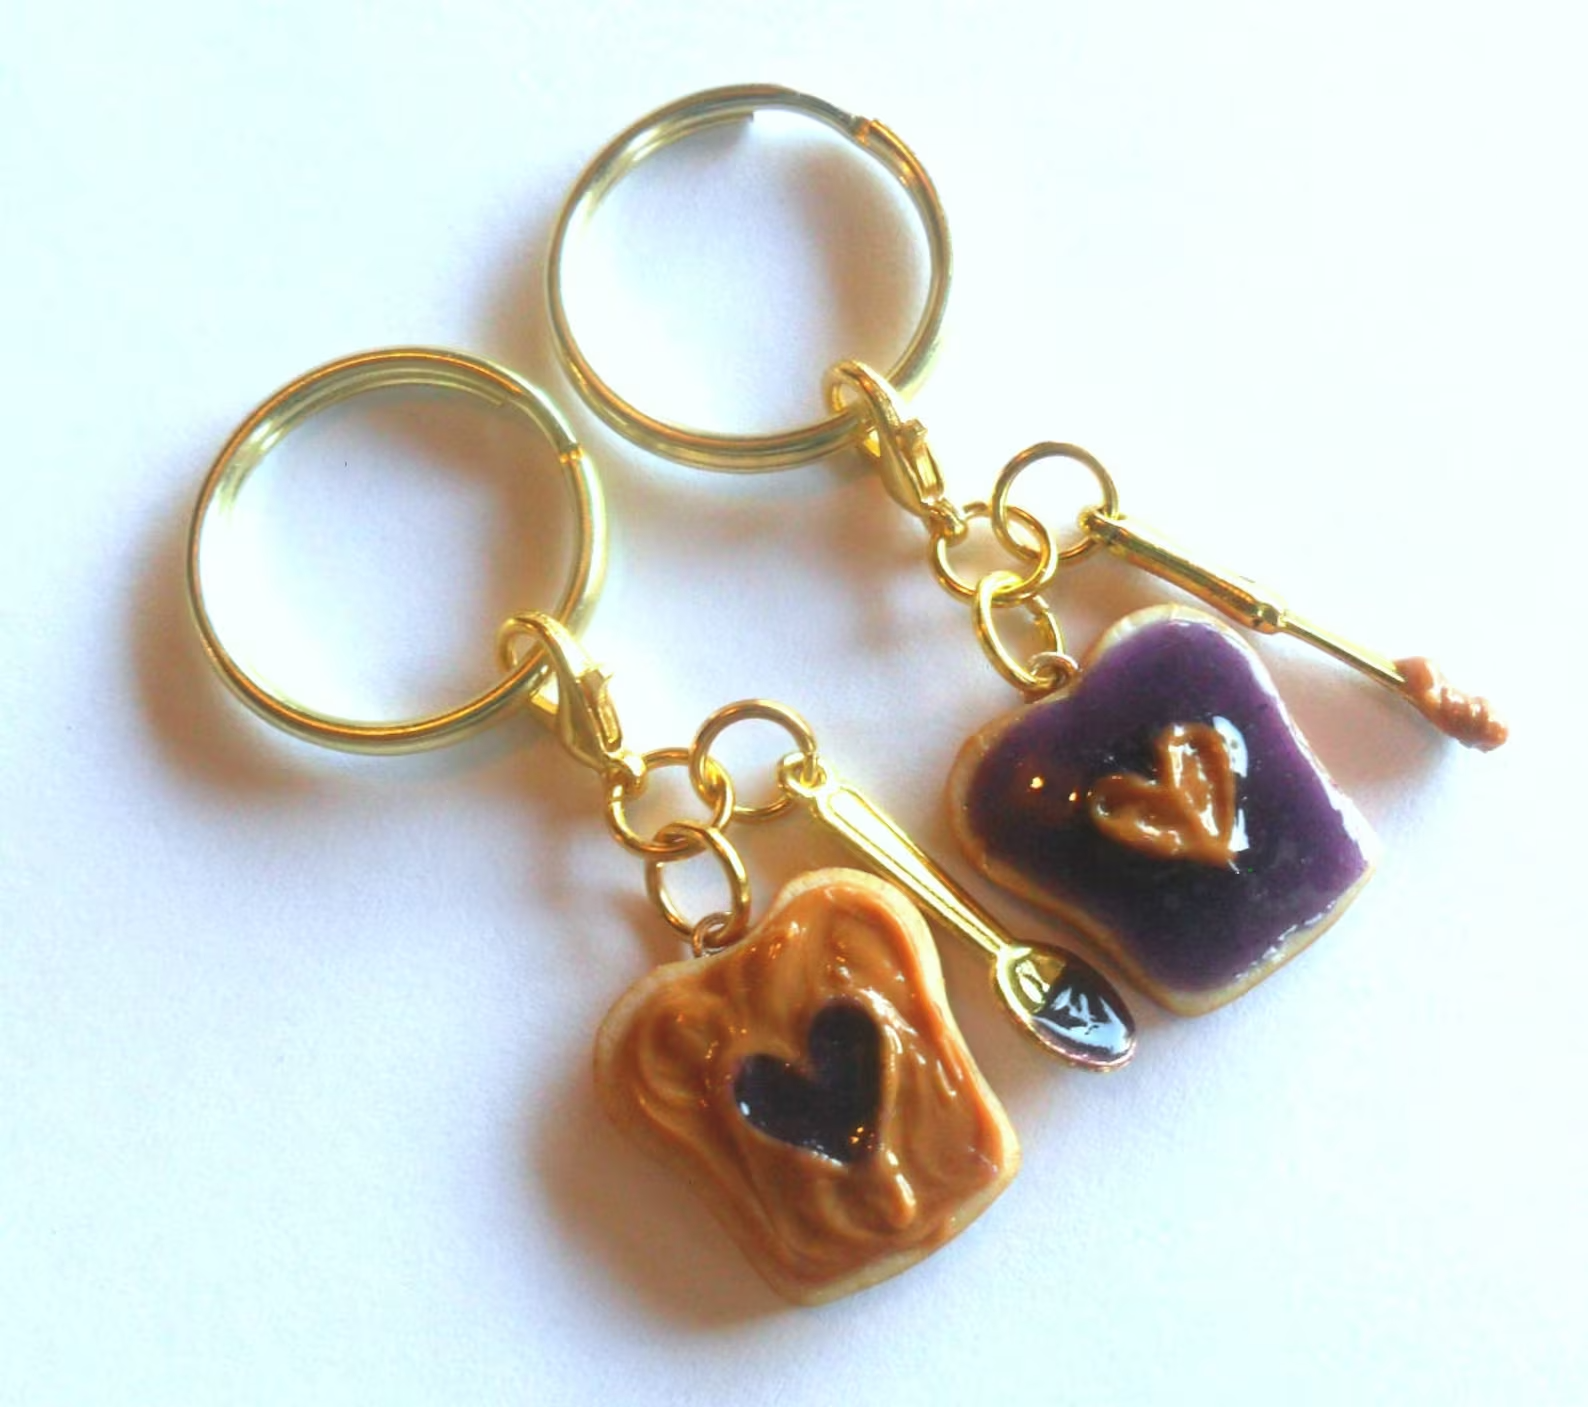 Best Friends Matching Necklace Set for 2, Peanut Butter & Jelly